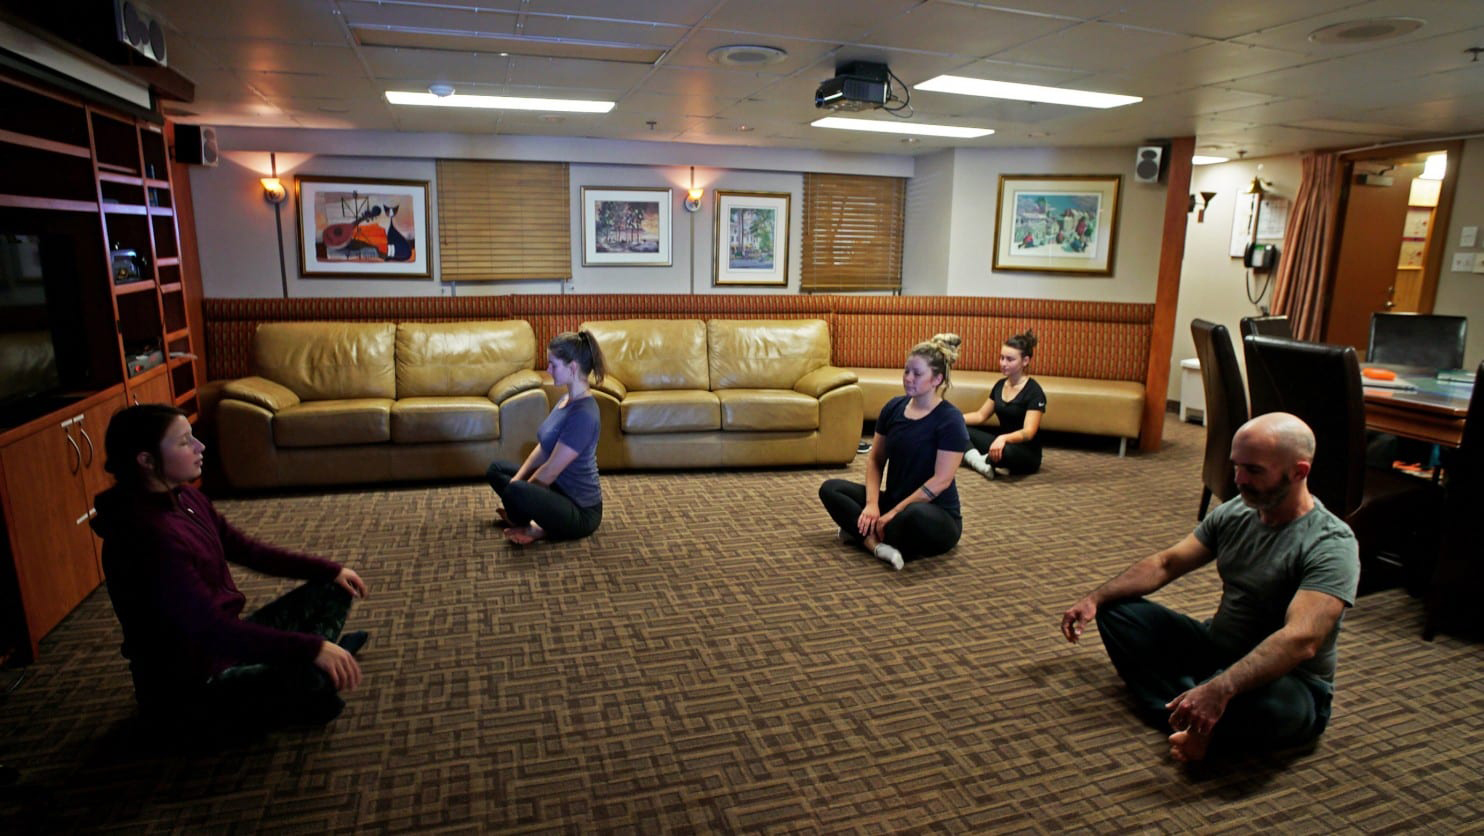 Aude Boivin-Rioux teaches yoga in the officer's lounge. (Alice Li / The Washington Post)